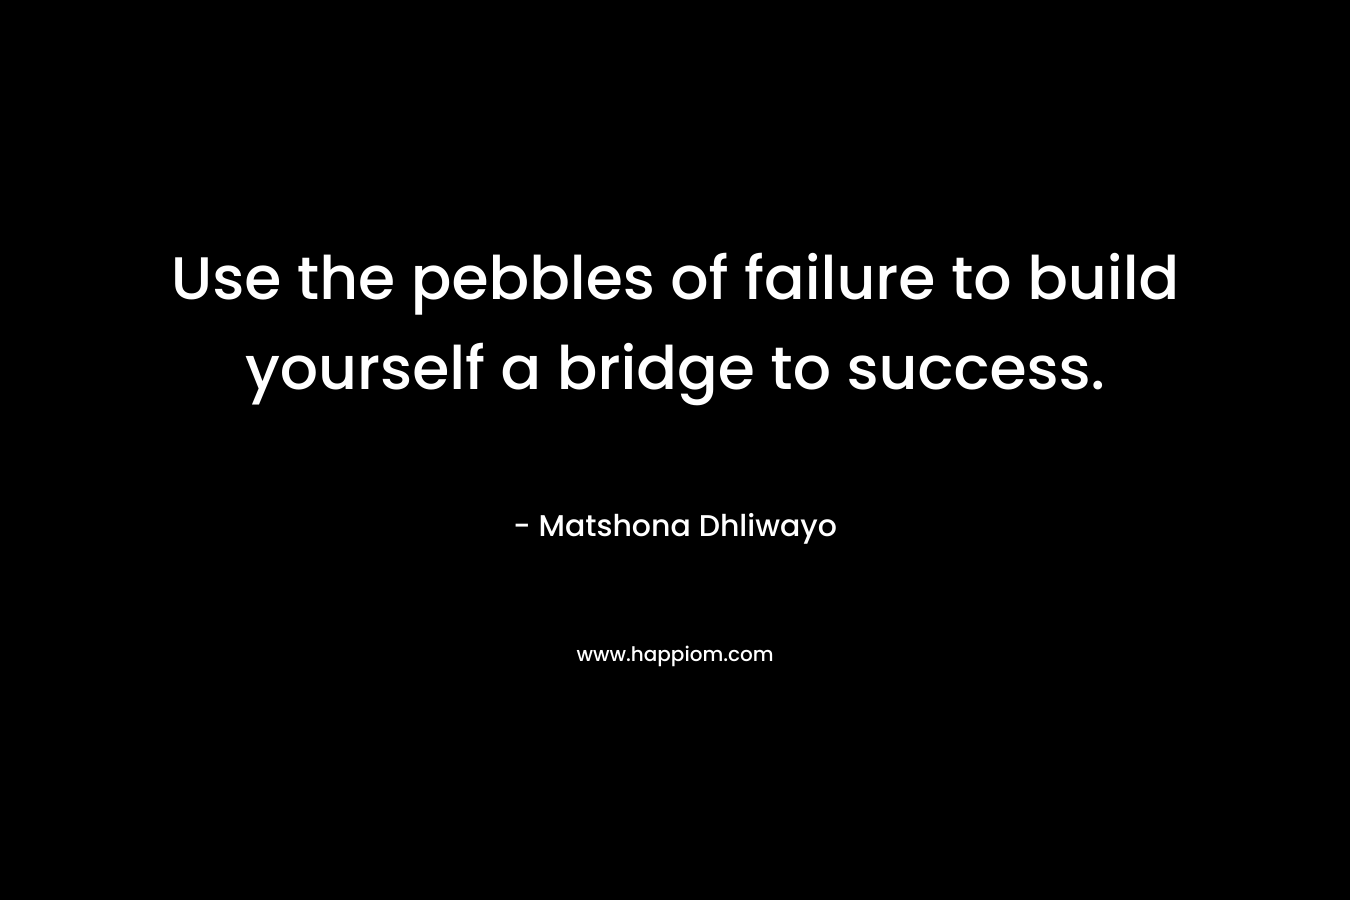 Use the pebbles of failure to build yourself a bridge to success. – Matshona Dhliwayo